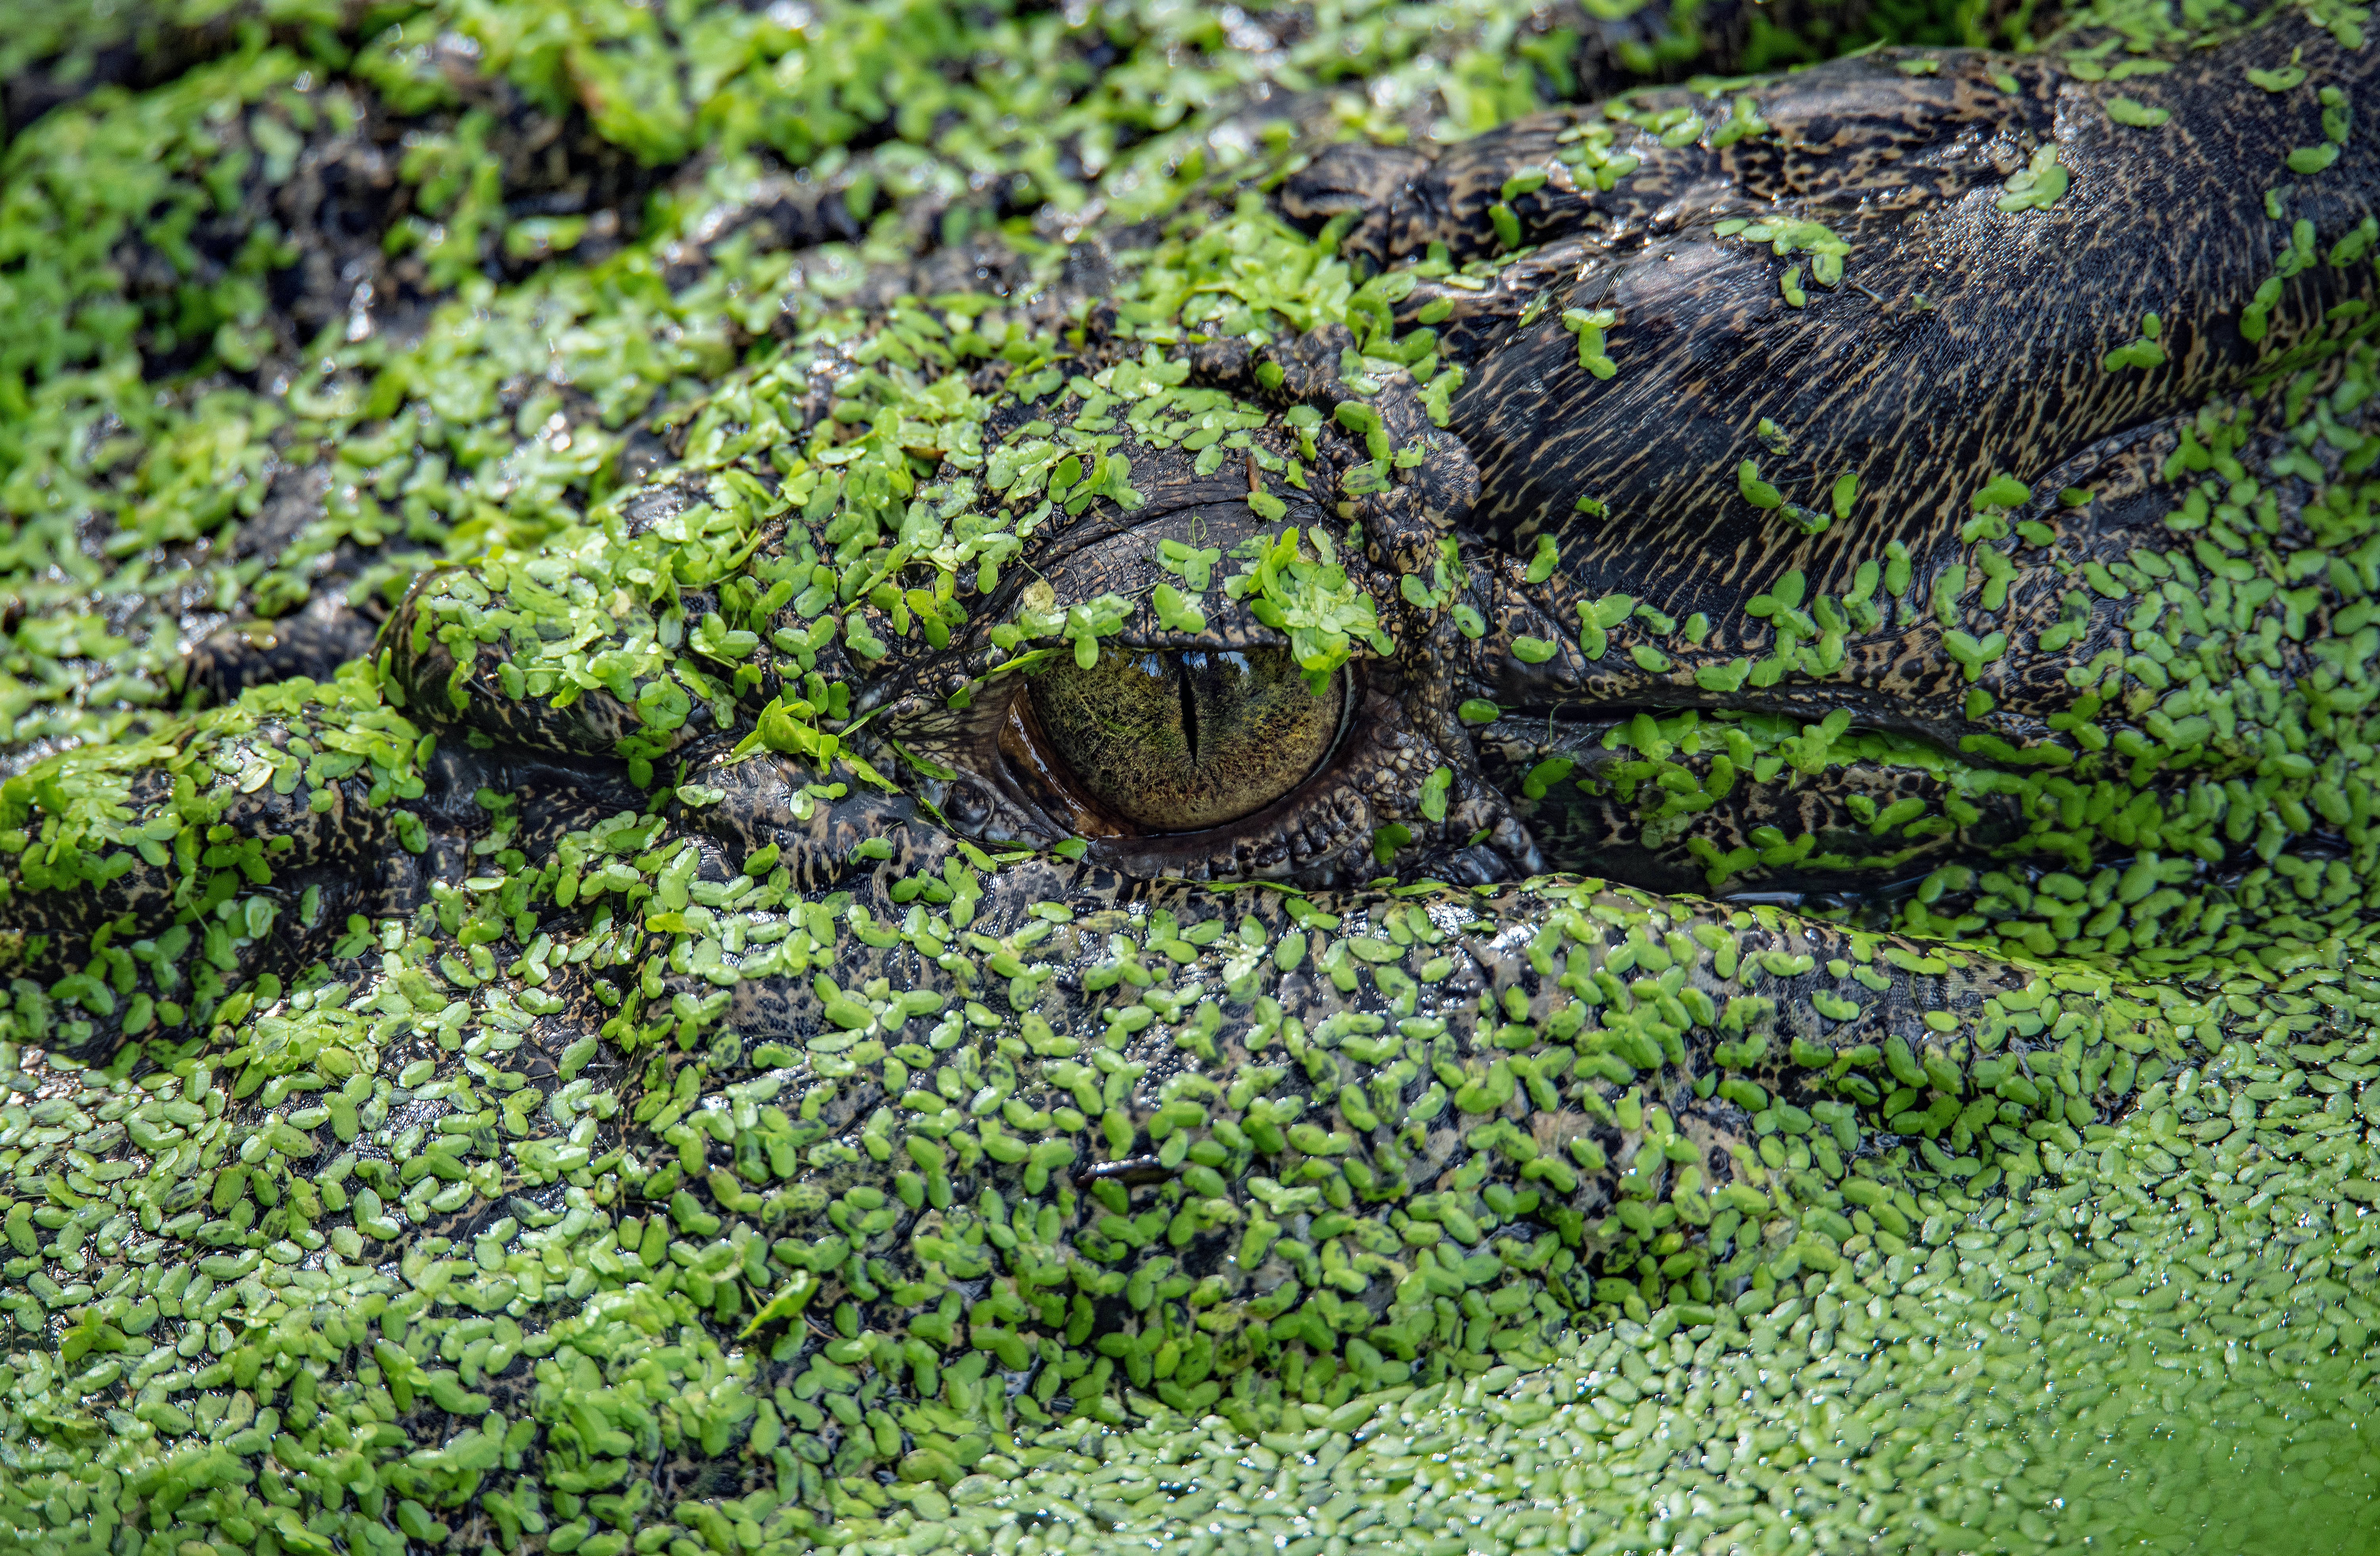 The head of this crocodile in a pond just looks like a log or rock covered in duckweed until you spot the eye looking at you.